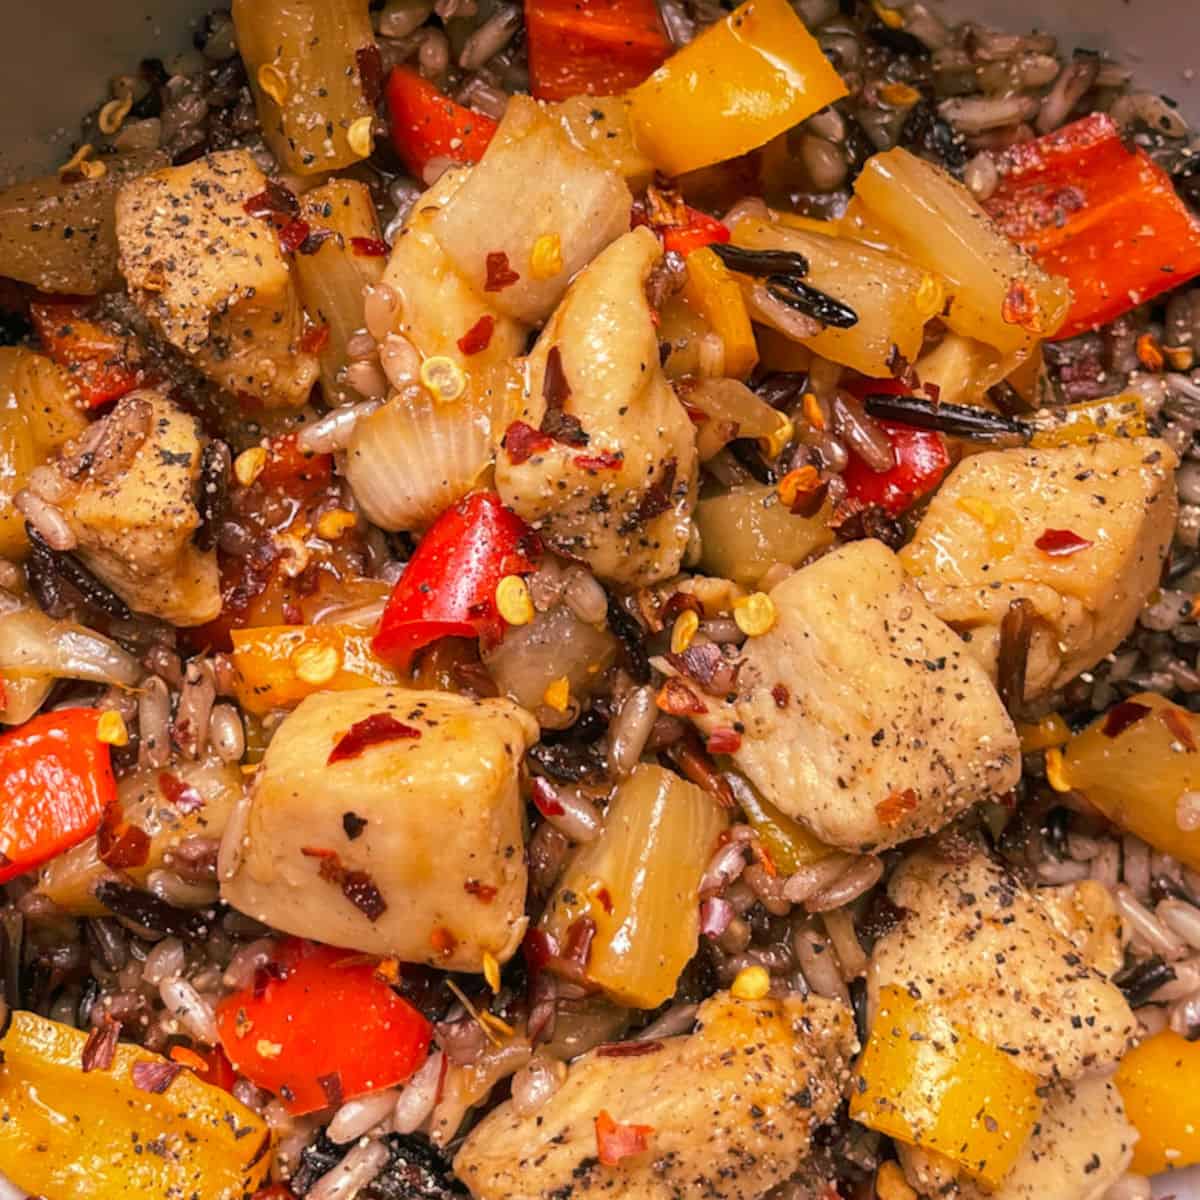 Easy Hawaiian BBQ Chicken Stir Fry Bowl in an up close photo with chicken cubes, sweet red and yellow peppers, onions, and wild rice pictured garnished with red pepper flakes and black pepper